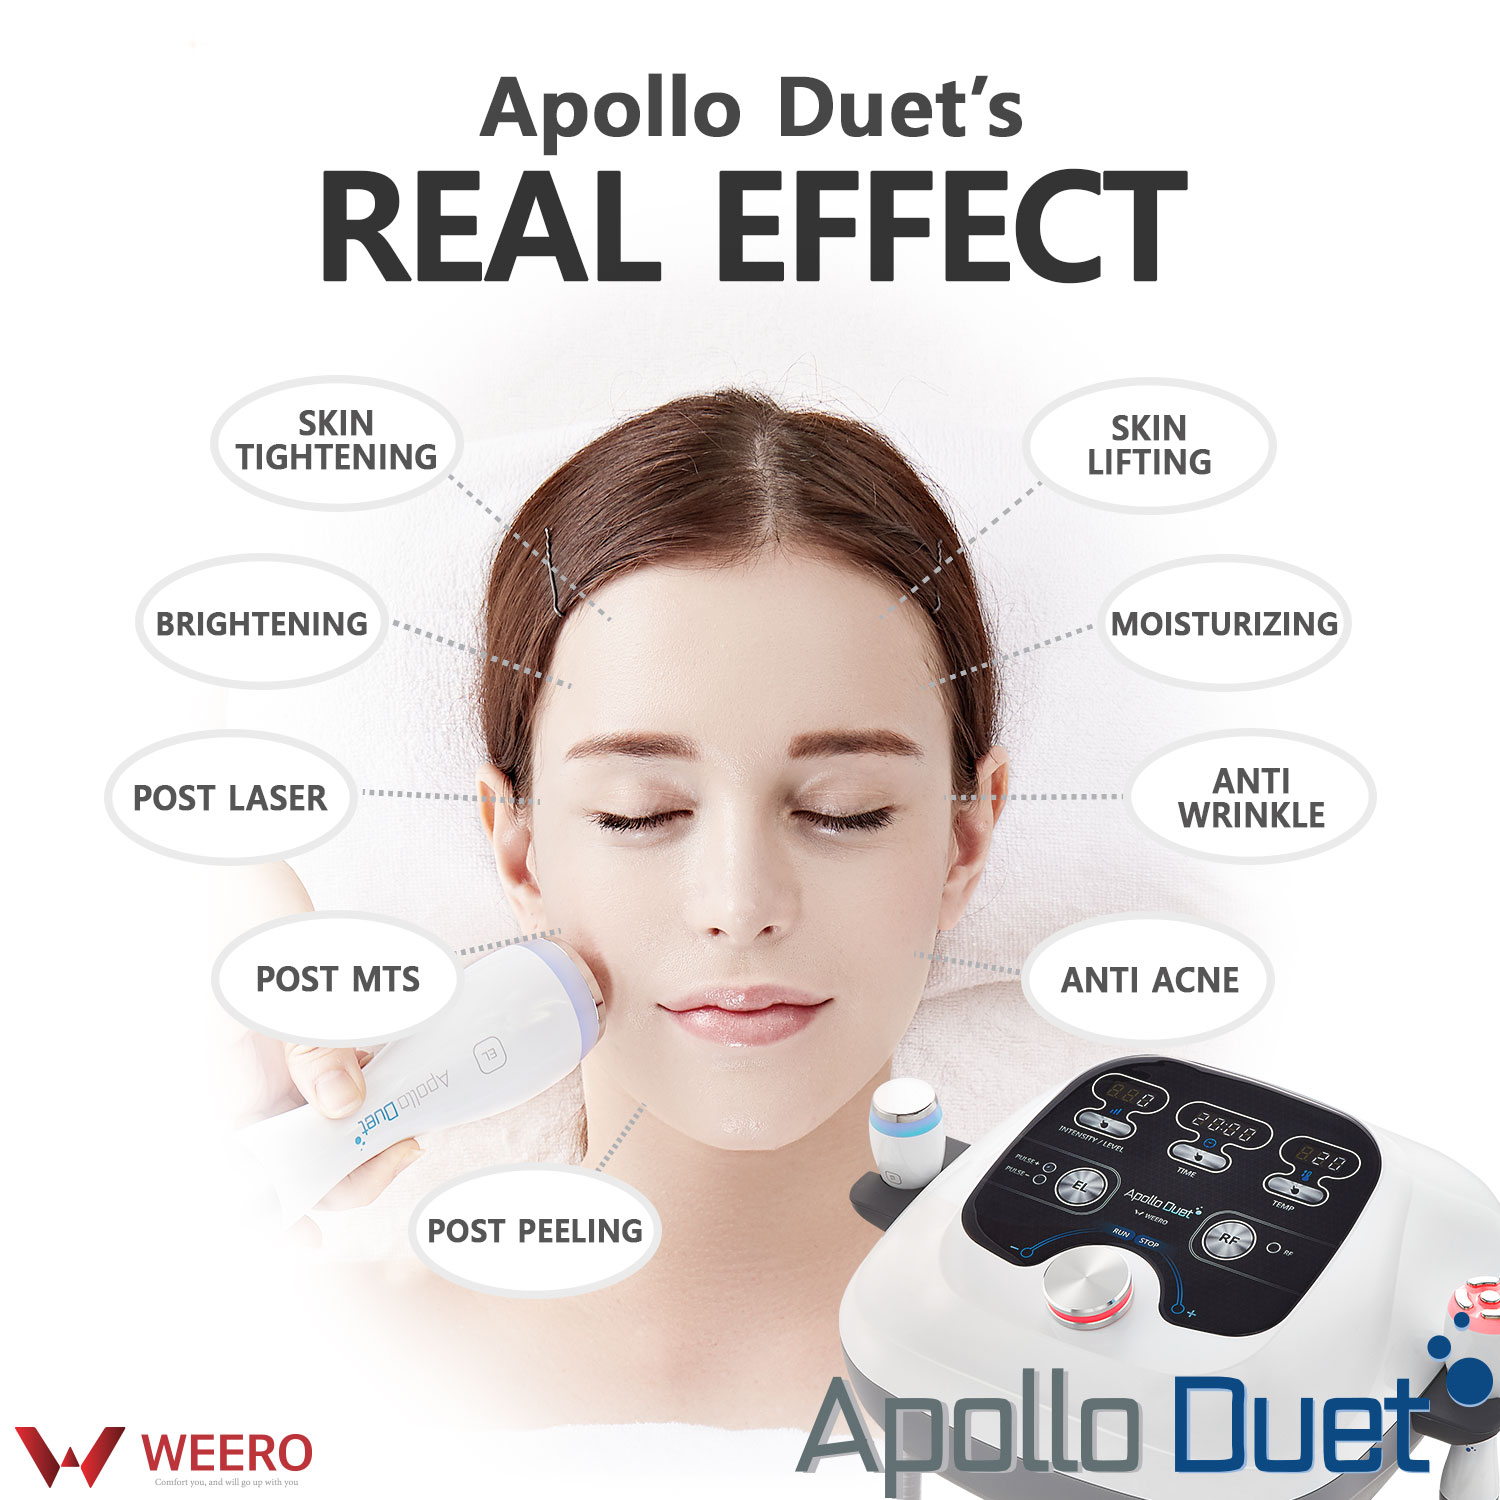 Apollo Duet's REAL EFFECT 썸네일